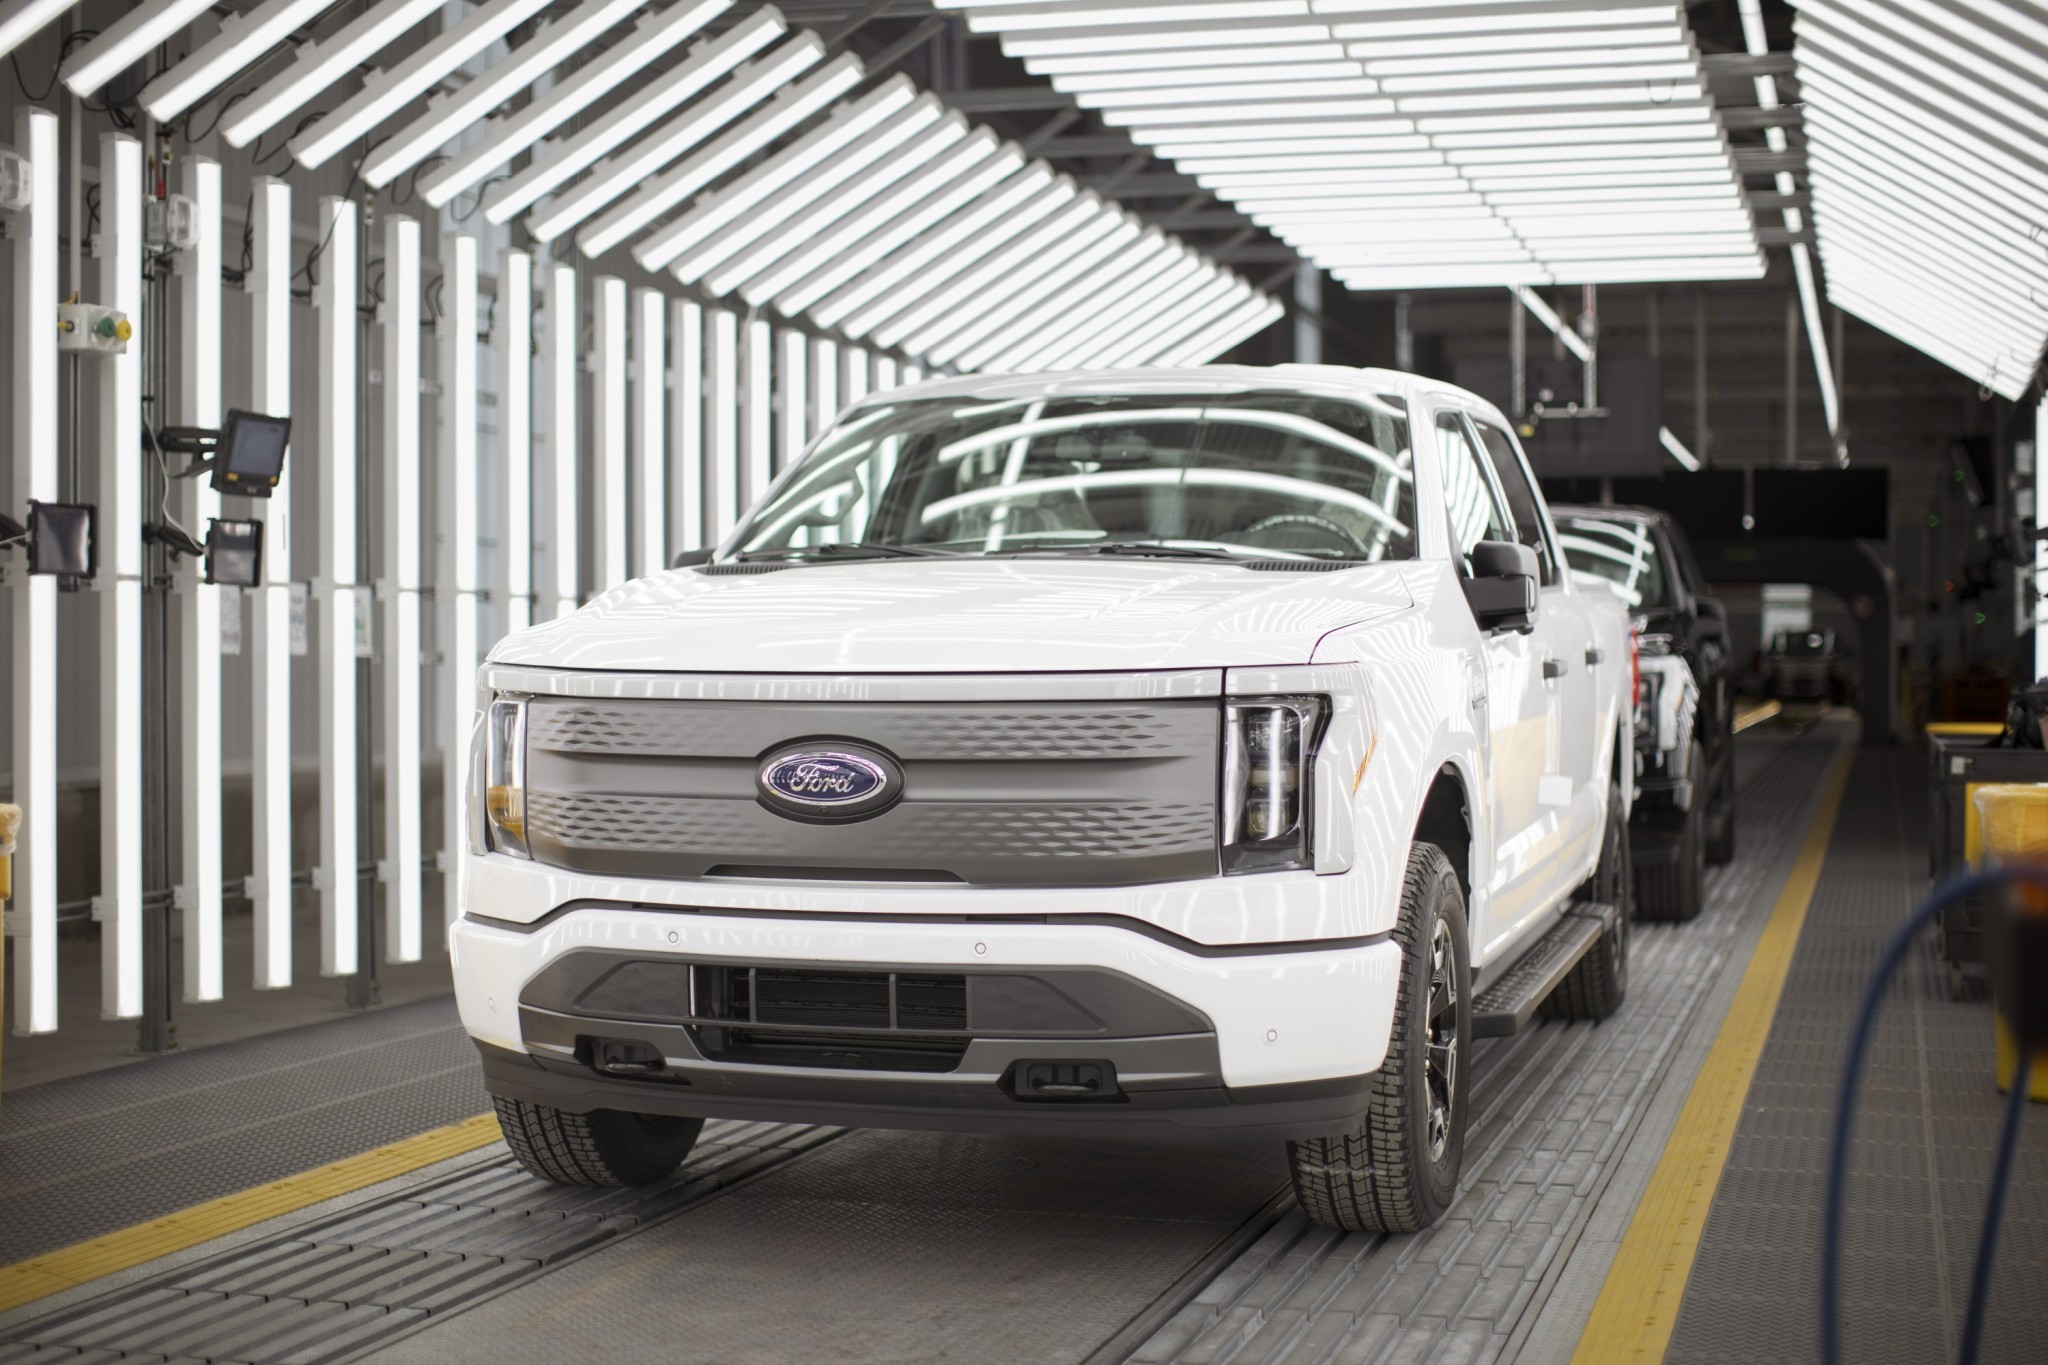 Ford's Cost-Cutting Measures and Quality Concerns in the EV Market